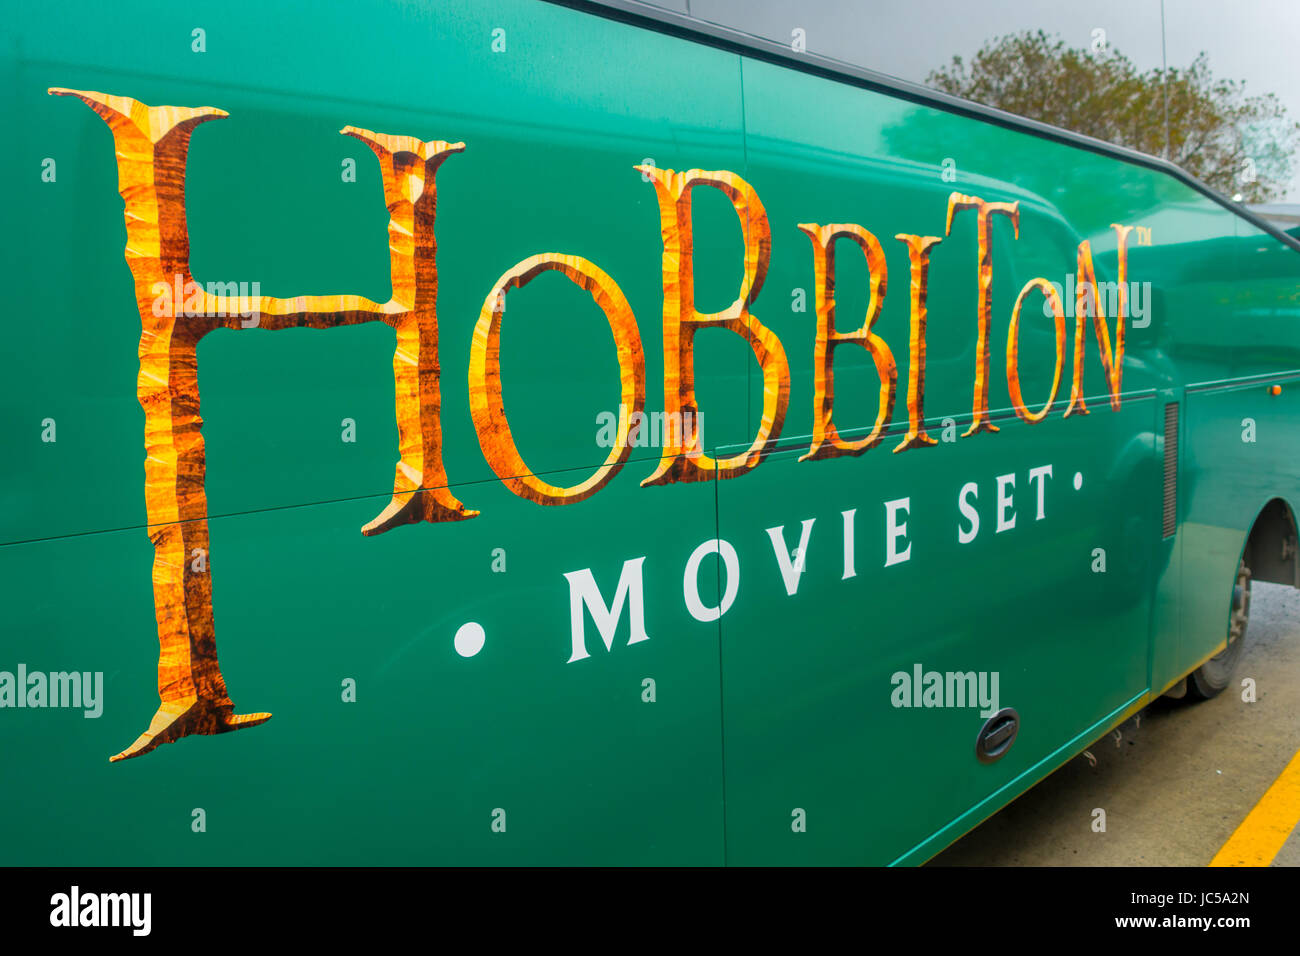 NORTH ISLAND, NEW ZEALAND- MAY 16, 2017: A full bus of tourists with a logo of famous movie, by the entrance to Hobbiton Village at Hobbiton Movie Set Stock Photo